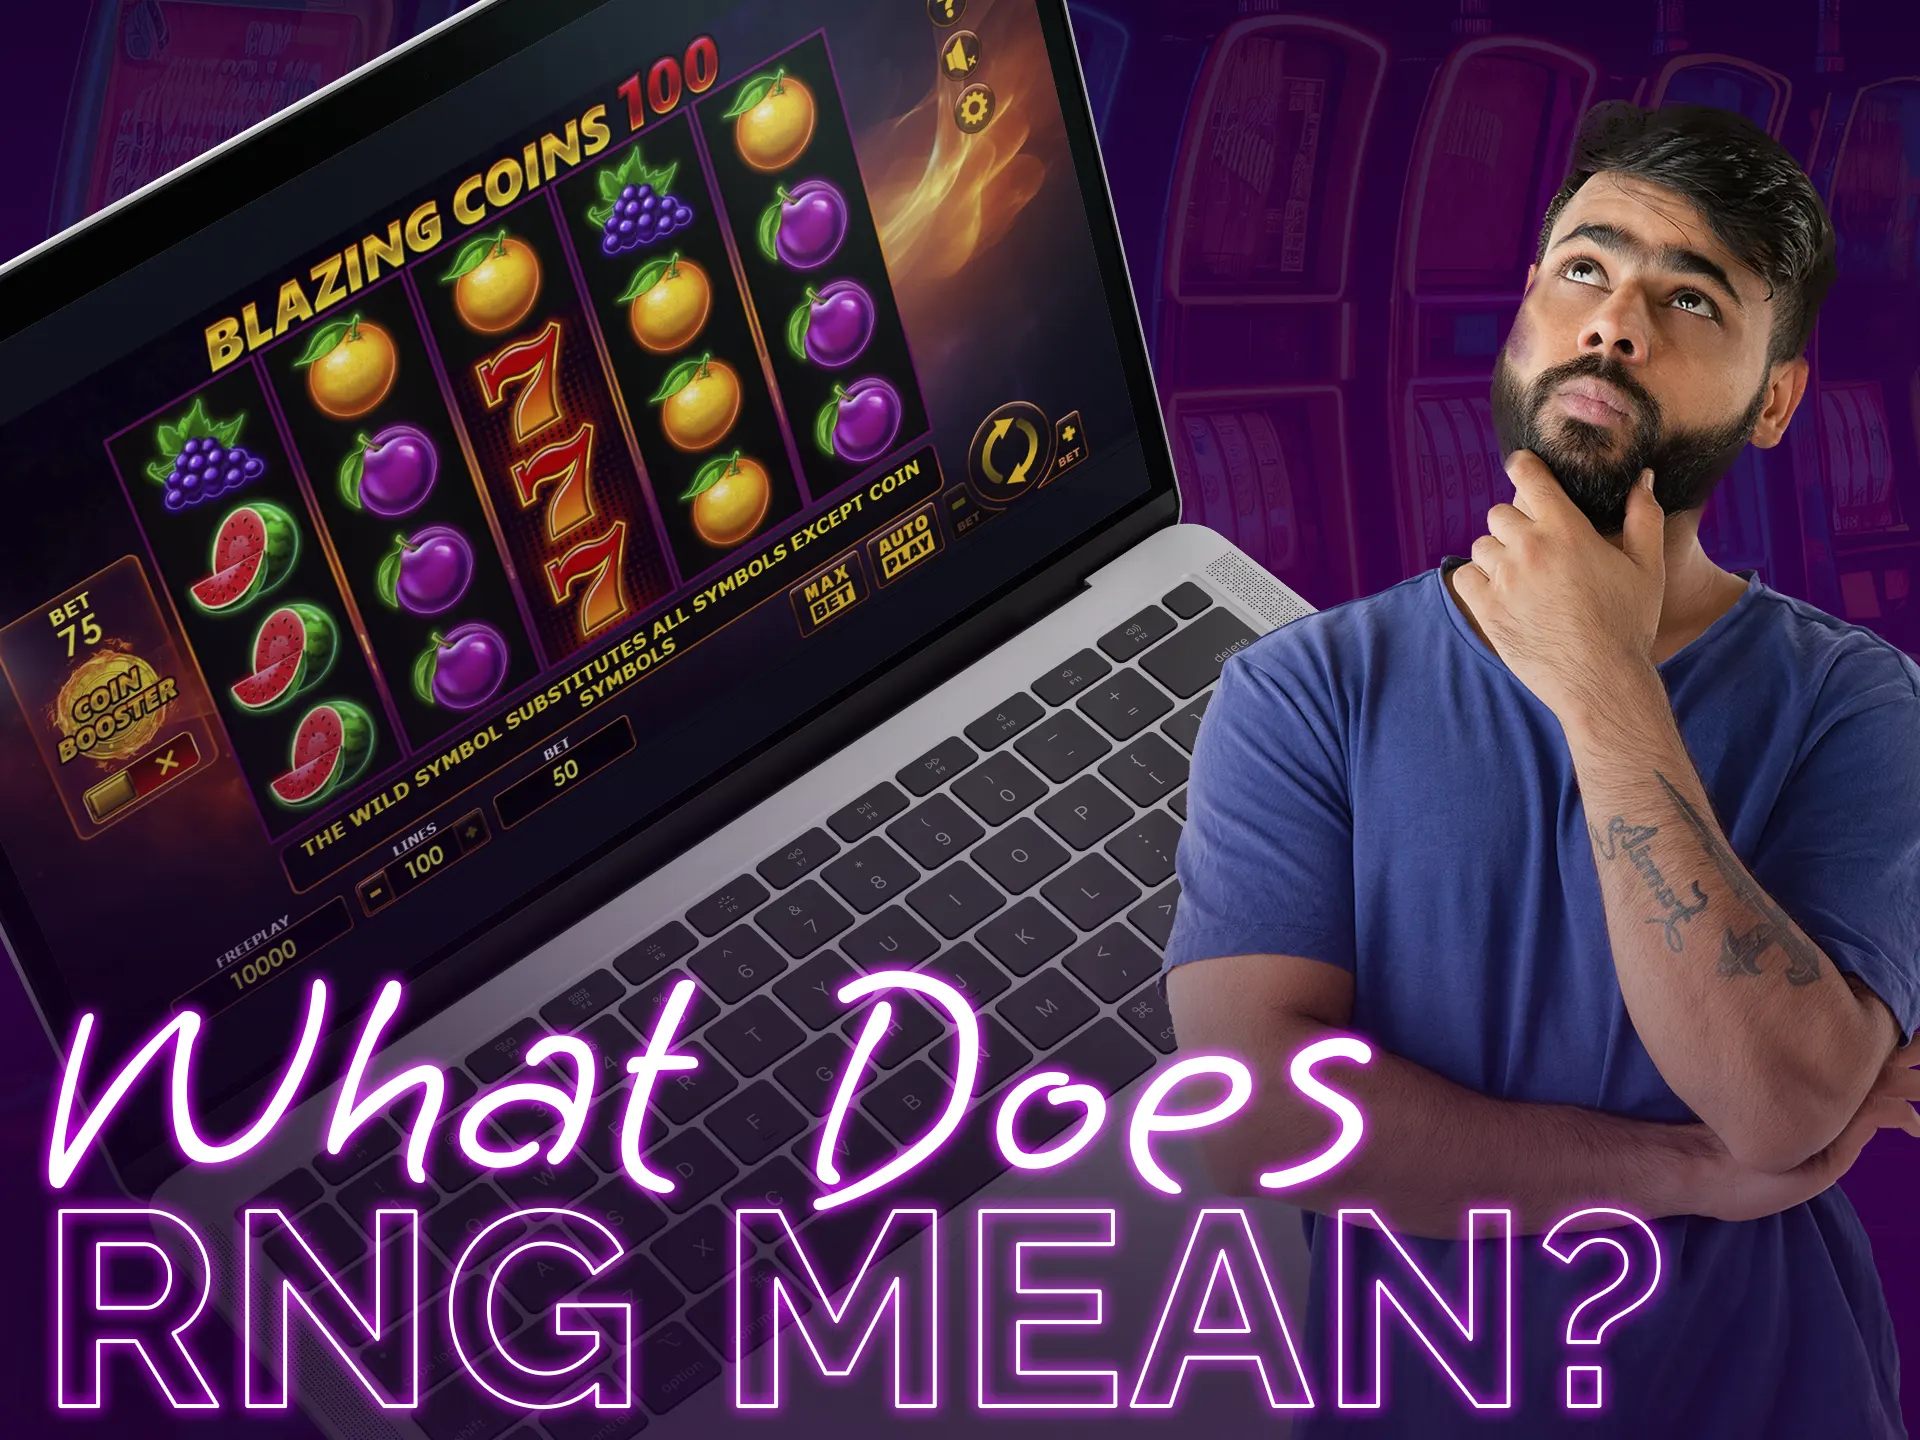 RNG ensures randomness in slot machines for unpredictable outcomes.